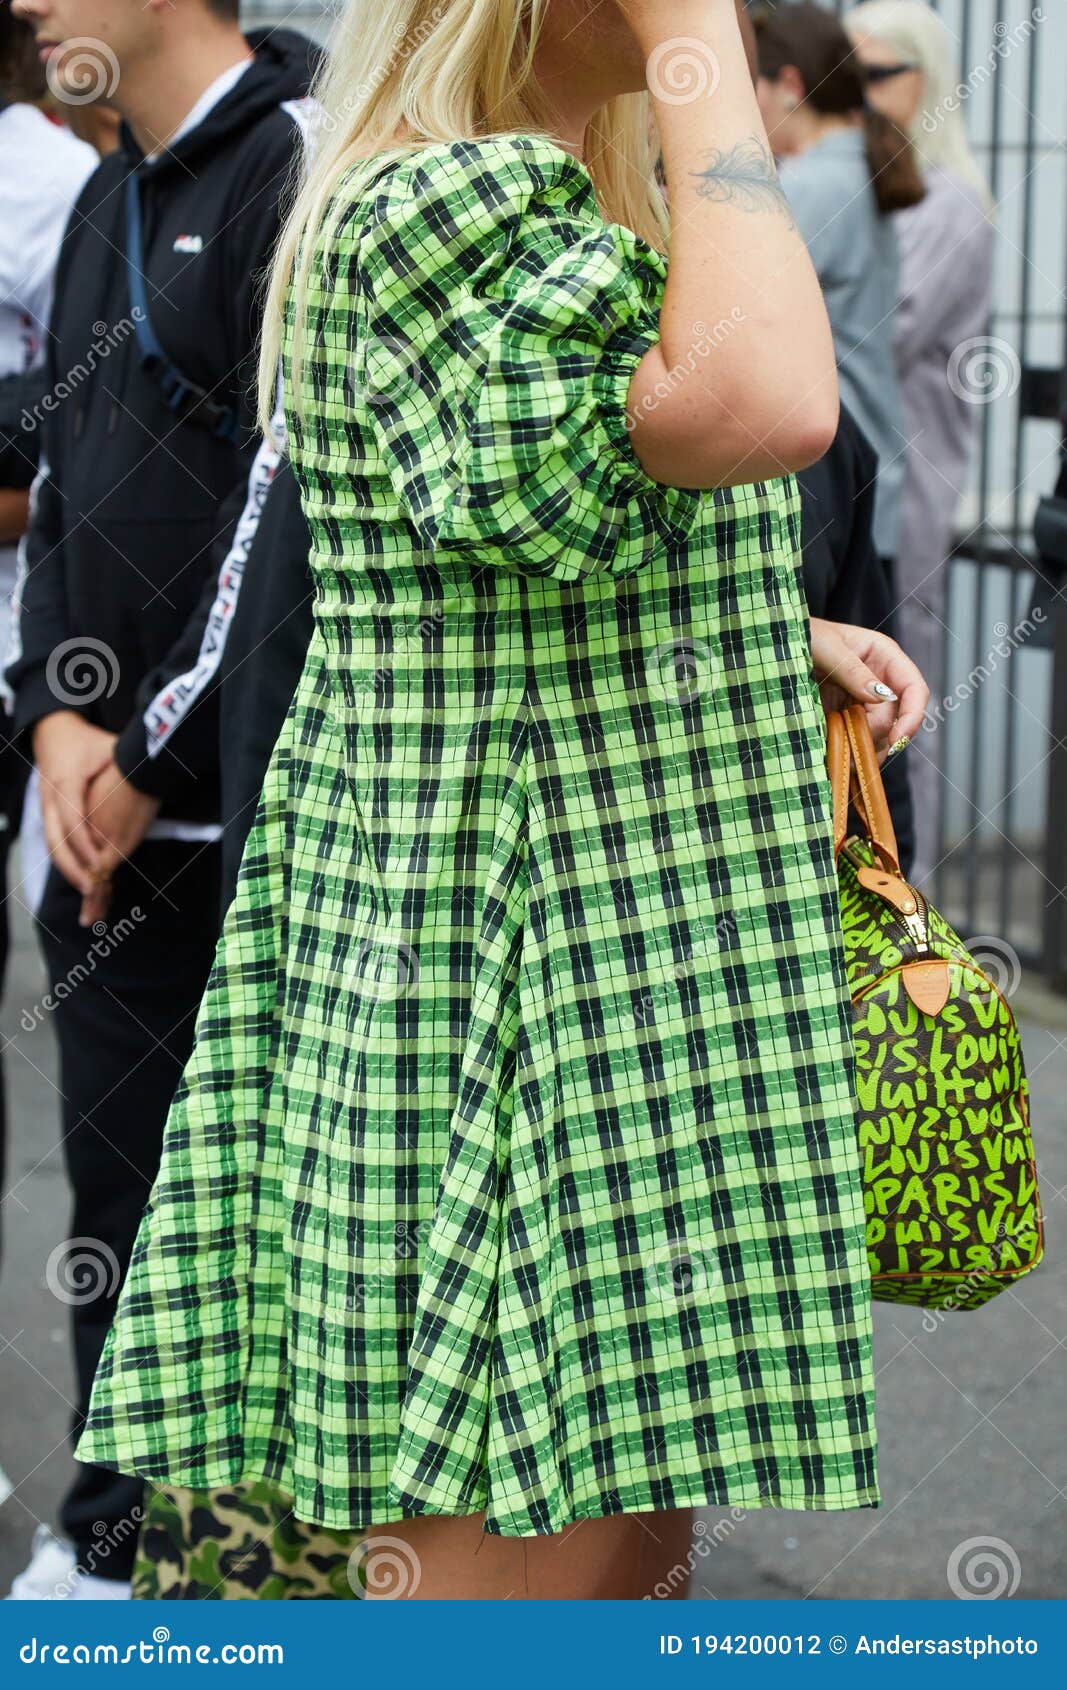 Woman with Green and Black Checkered Dress and Louis Vuitton Bag